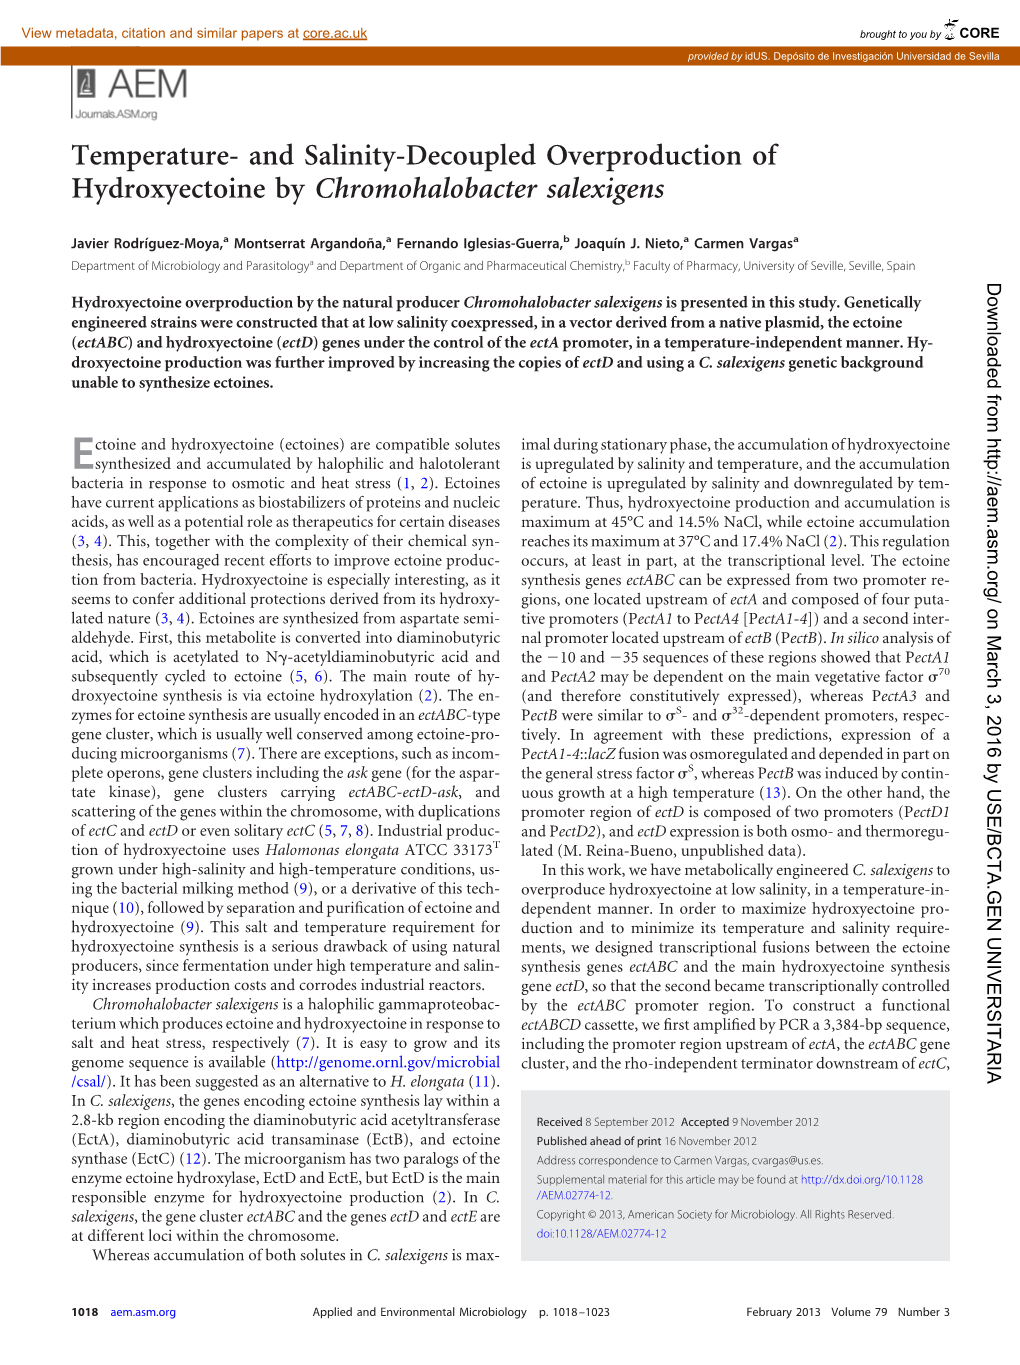 Temperature- and Salinity-Decoupled Overproduction of Hydroxyectoine by Chromohalobacter Salexigens